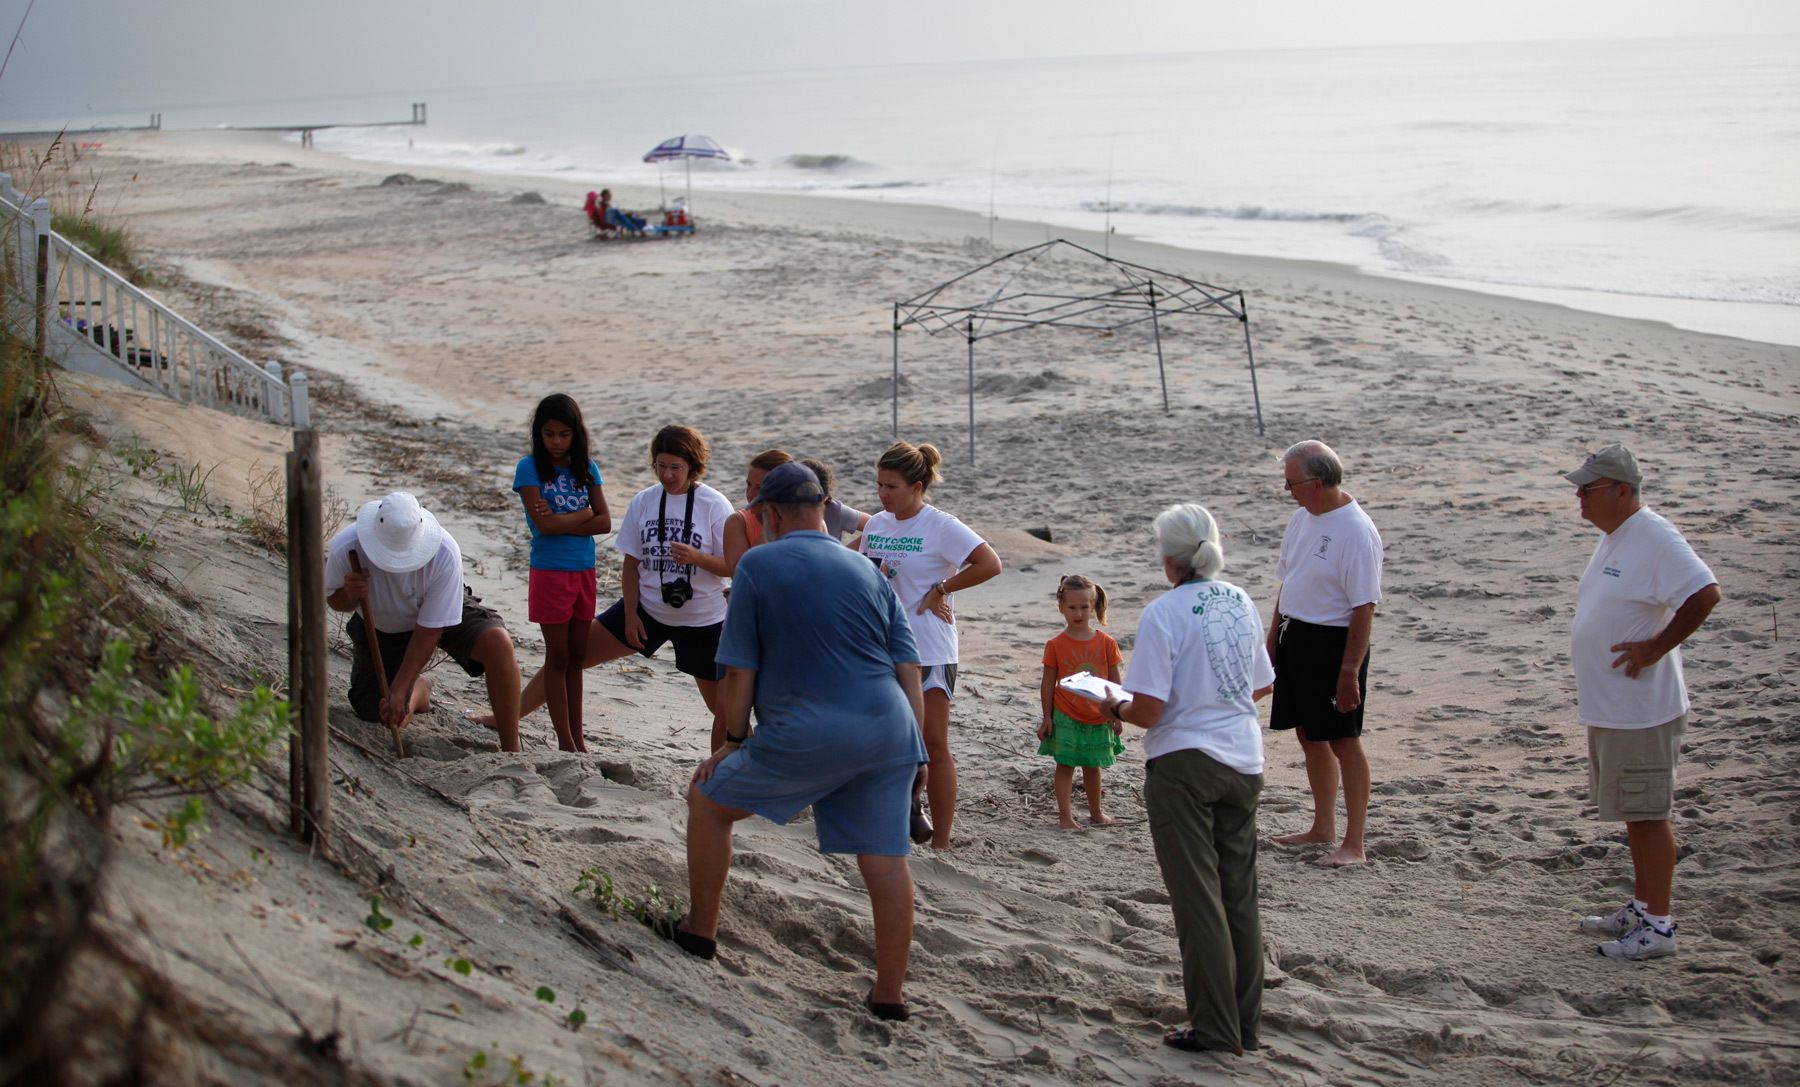 South Carolina United Turtle Enthusiasts (SCUTE), head coordinator  and co-founder Jeff McClary probes gently for a Green turtle nest using a cue stick while trying to locate a the nest August 13, 2012 on Garden City Beach, South Carolina. Nest location is difficult and only certified members are allowed to do it. Green turtles are even more endangered than Loggerheads and the group has secured 4 nests on this beach this nesting season. {quote}We started SCUTE  to get more hatchlings into the water,{quote} he said about the organization. {quote}Instead of sitting back and counting dead turtles, we wanted to maximize live turtles into the enviroment.{quote} Turtle volunteers walk the area's beaches along South Carolina's coast daily during the nesting season, looking for signs of turtle activity and keeping tabs on the progress of the endangered species of turtles that lay their eggs along the coast.   REUTERS/Randall Hill  (UNITED STATES)